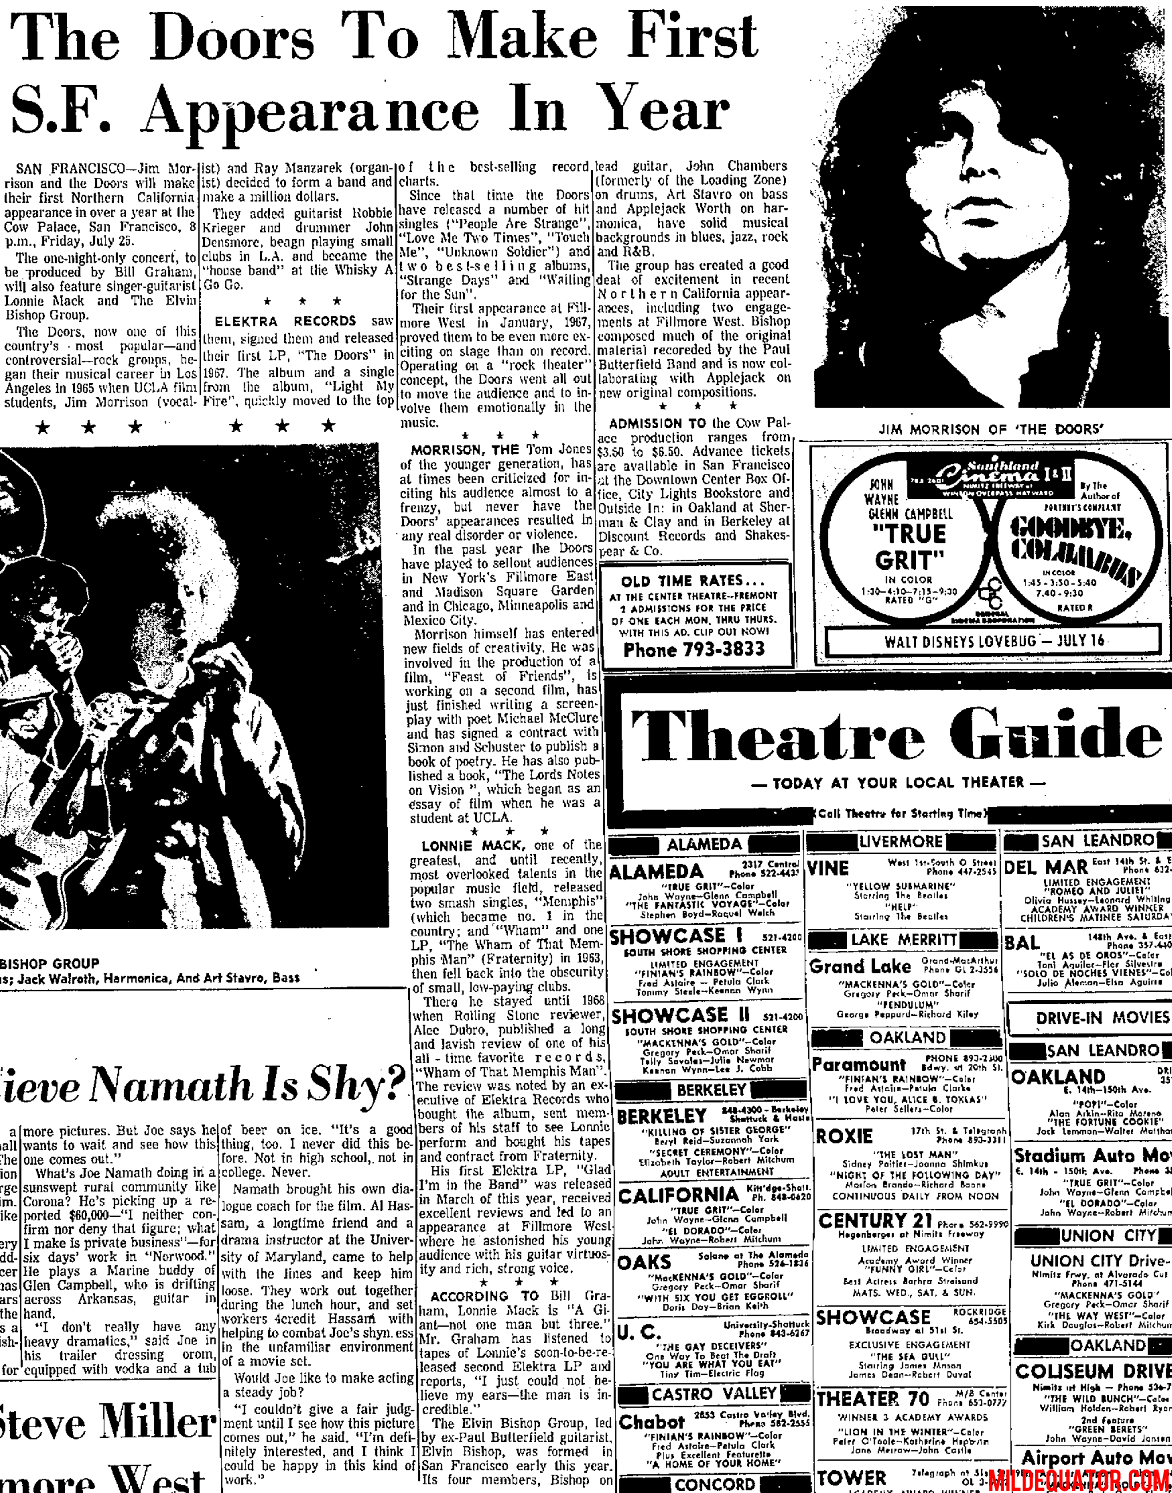 Cow Palace 1969 - Review